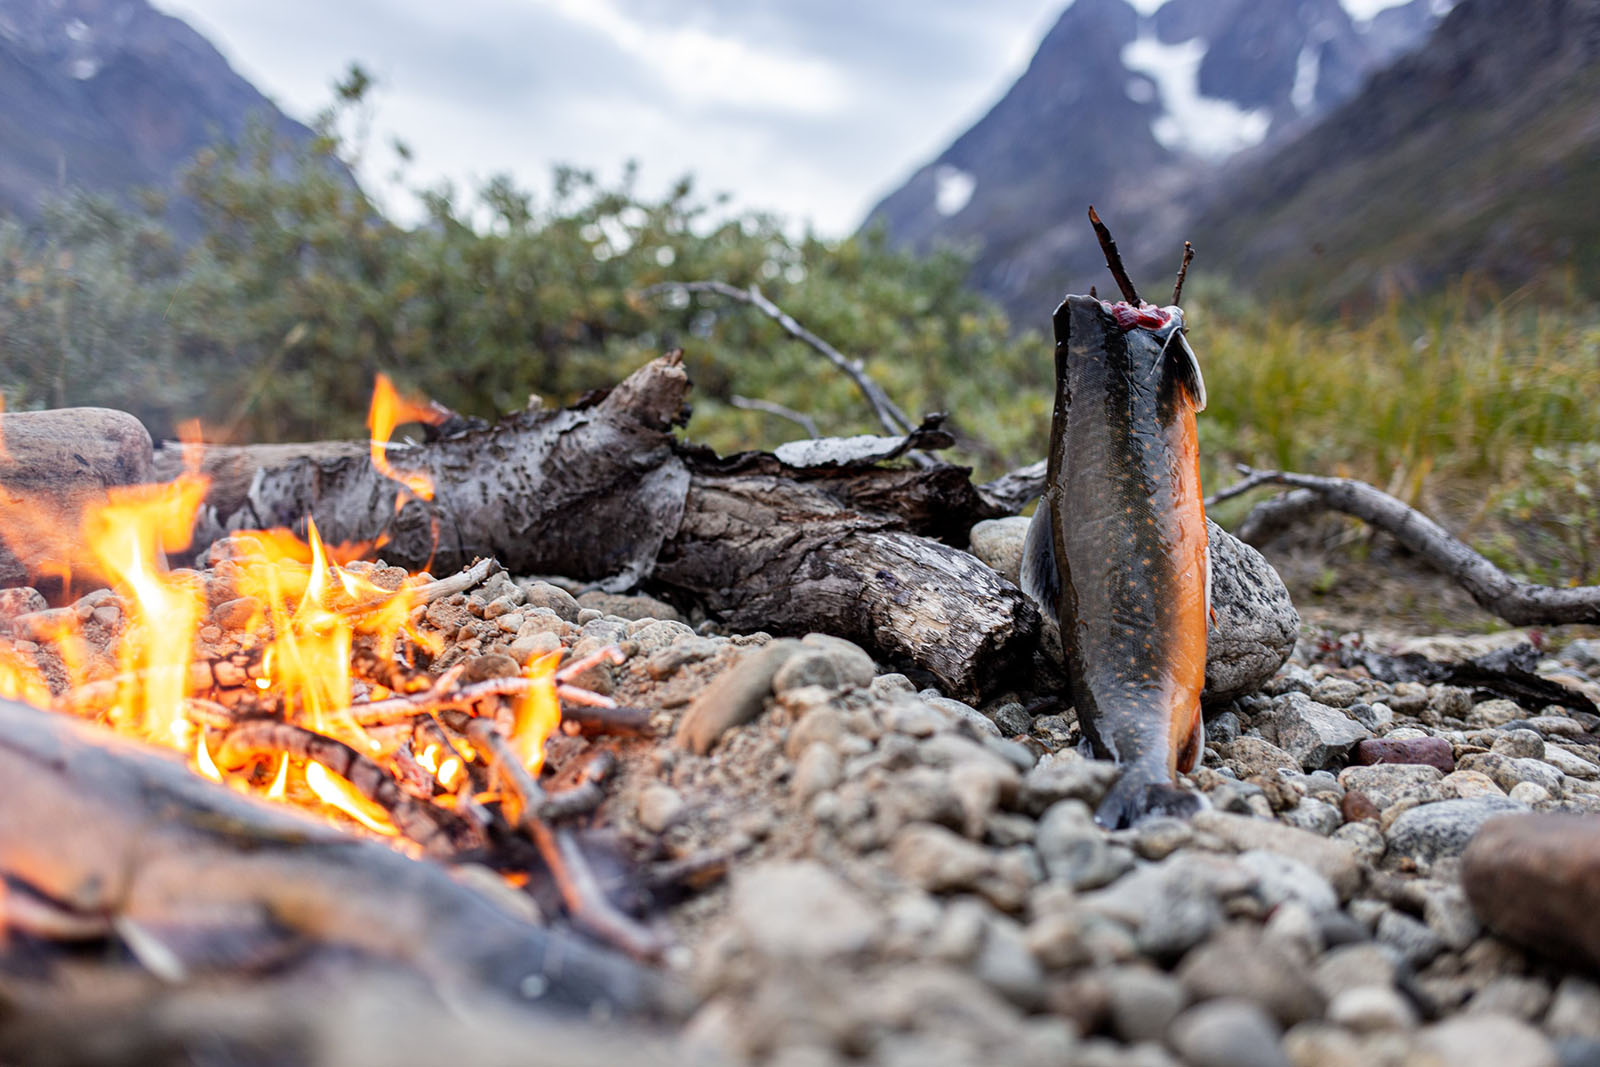 Artic Char grilled over an open fire in South Greenland Tasermiut Fjord